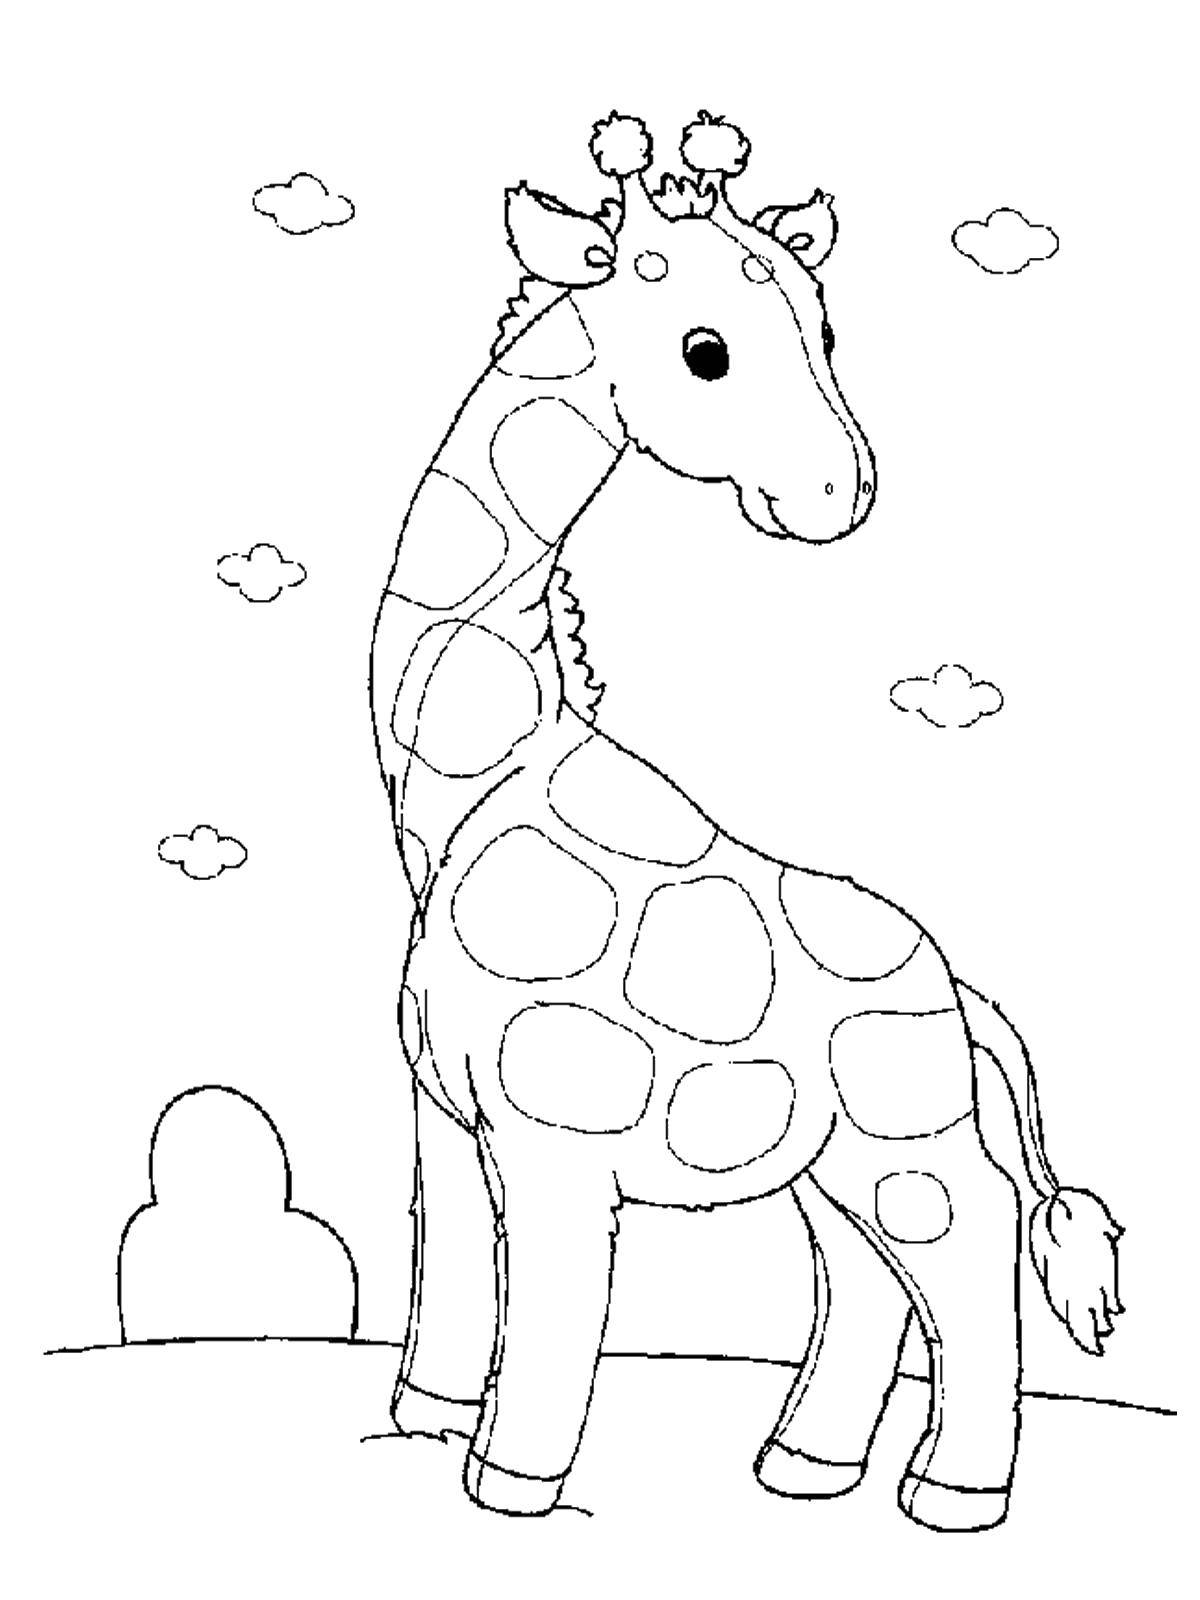 Coloring Little spotted giraffe. Category animals. Tags:  Animals, giraffe.